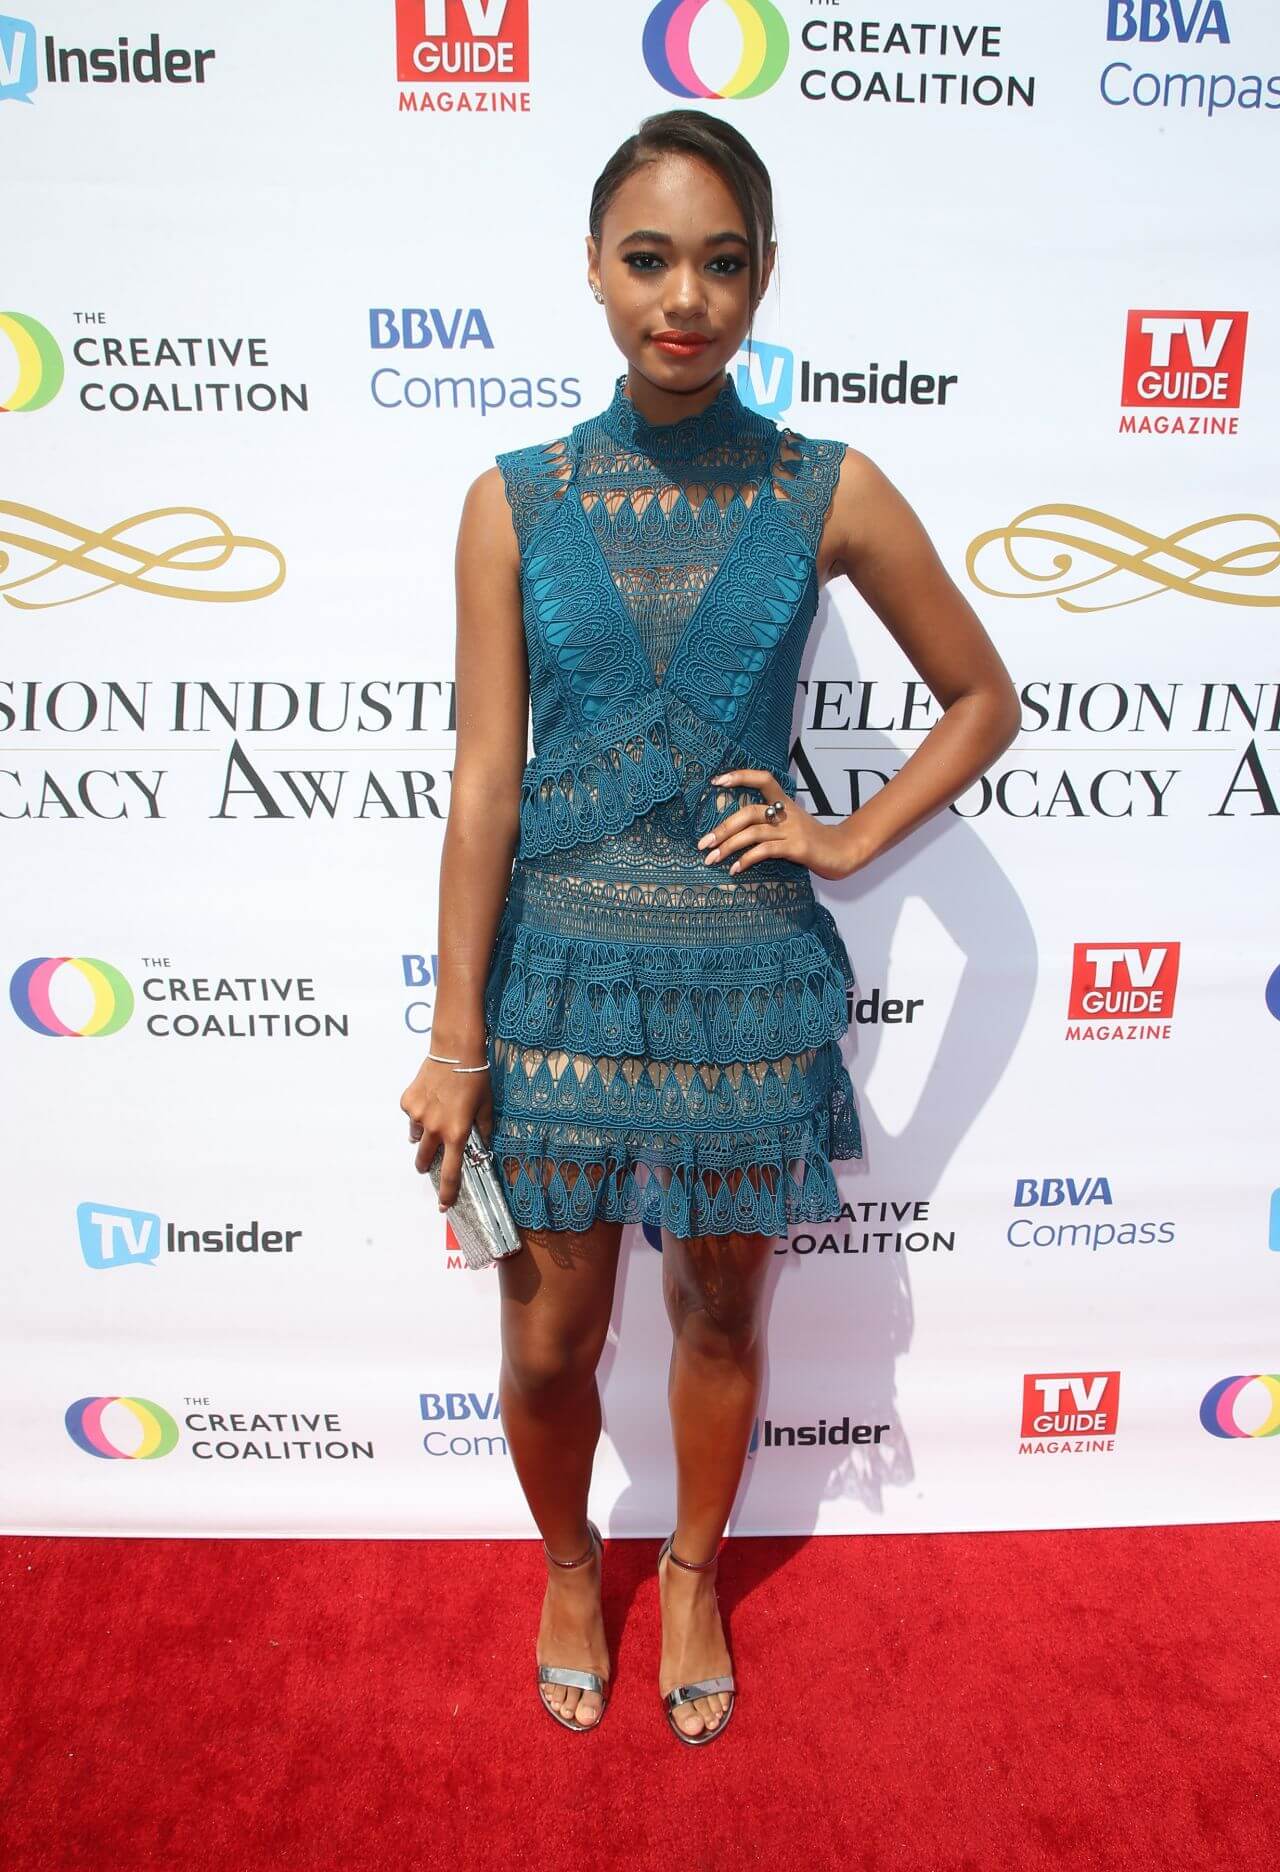 Chandler Kinney In Blue Lace Design Mini Dress At Television Industry Advocacy Awards in LA